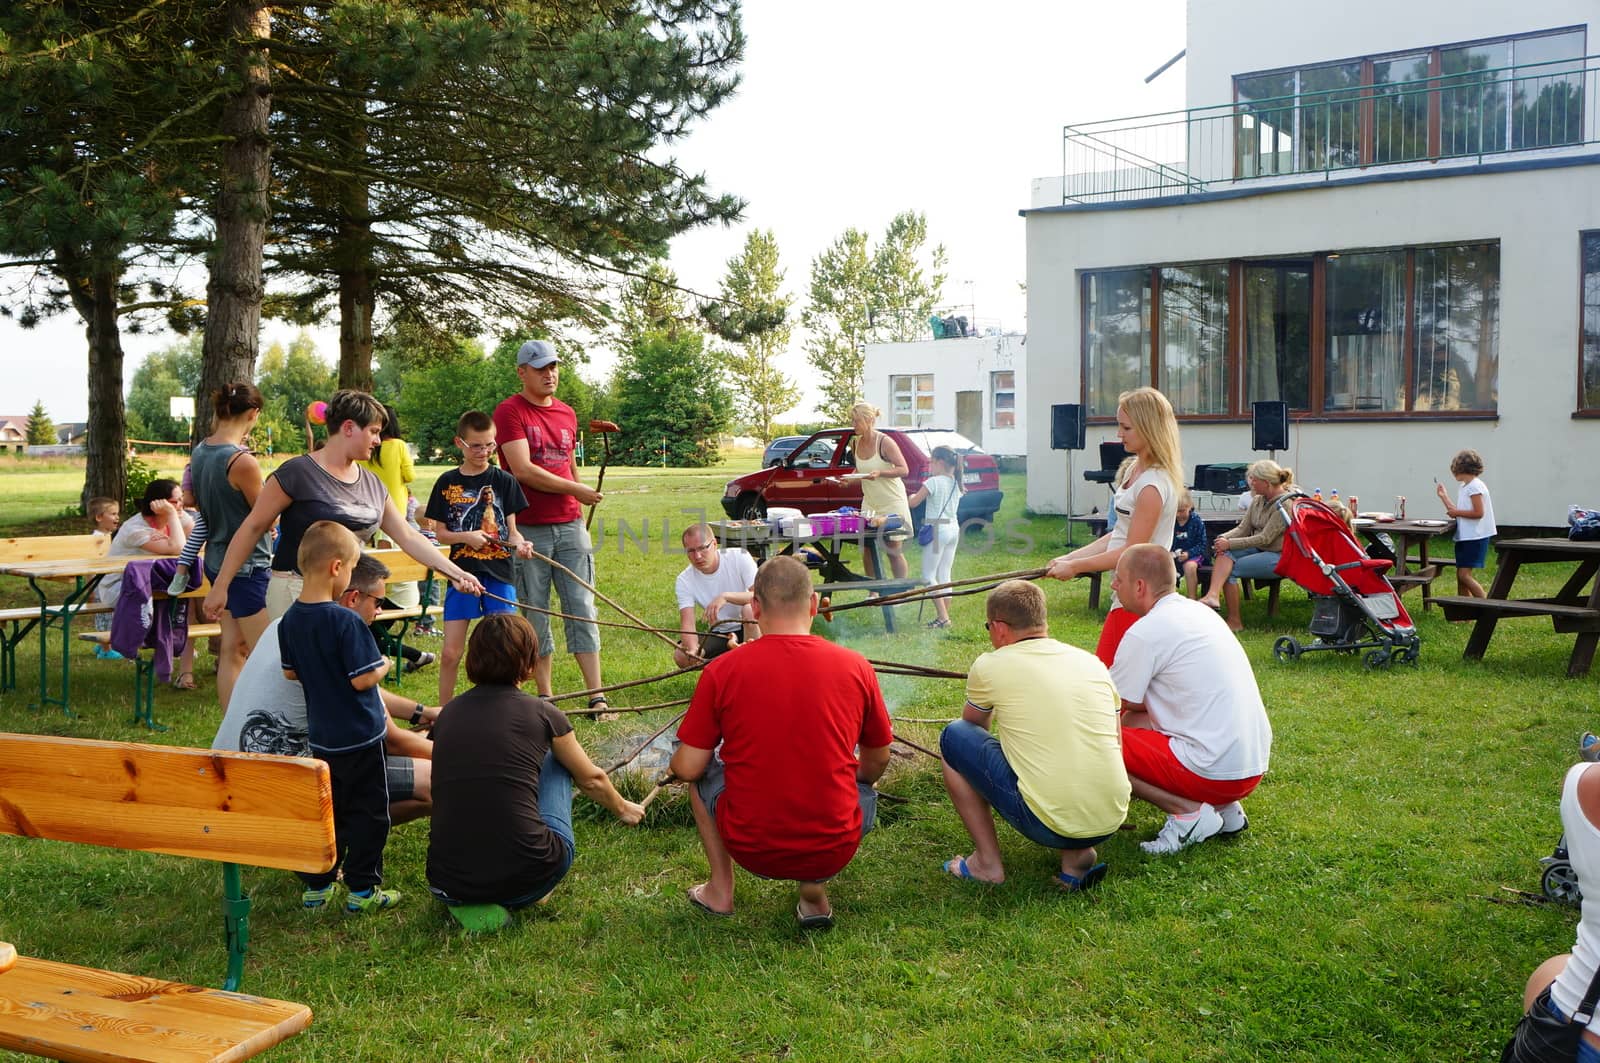 SIANOZETY, POLAND - JULY 22, 2015: People sitting around a fire place and grilling sausages at a barbecue event